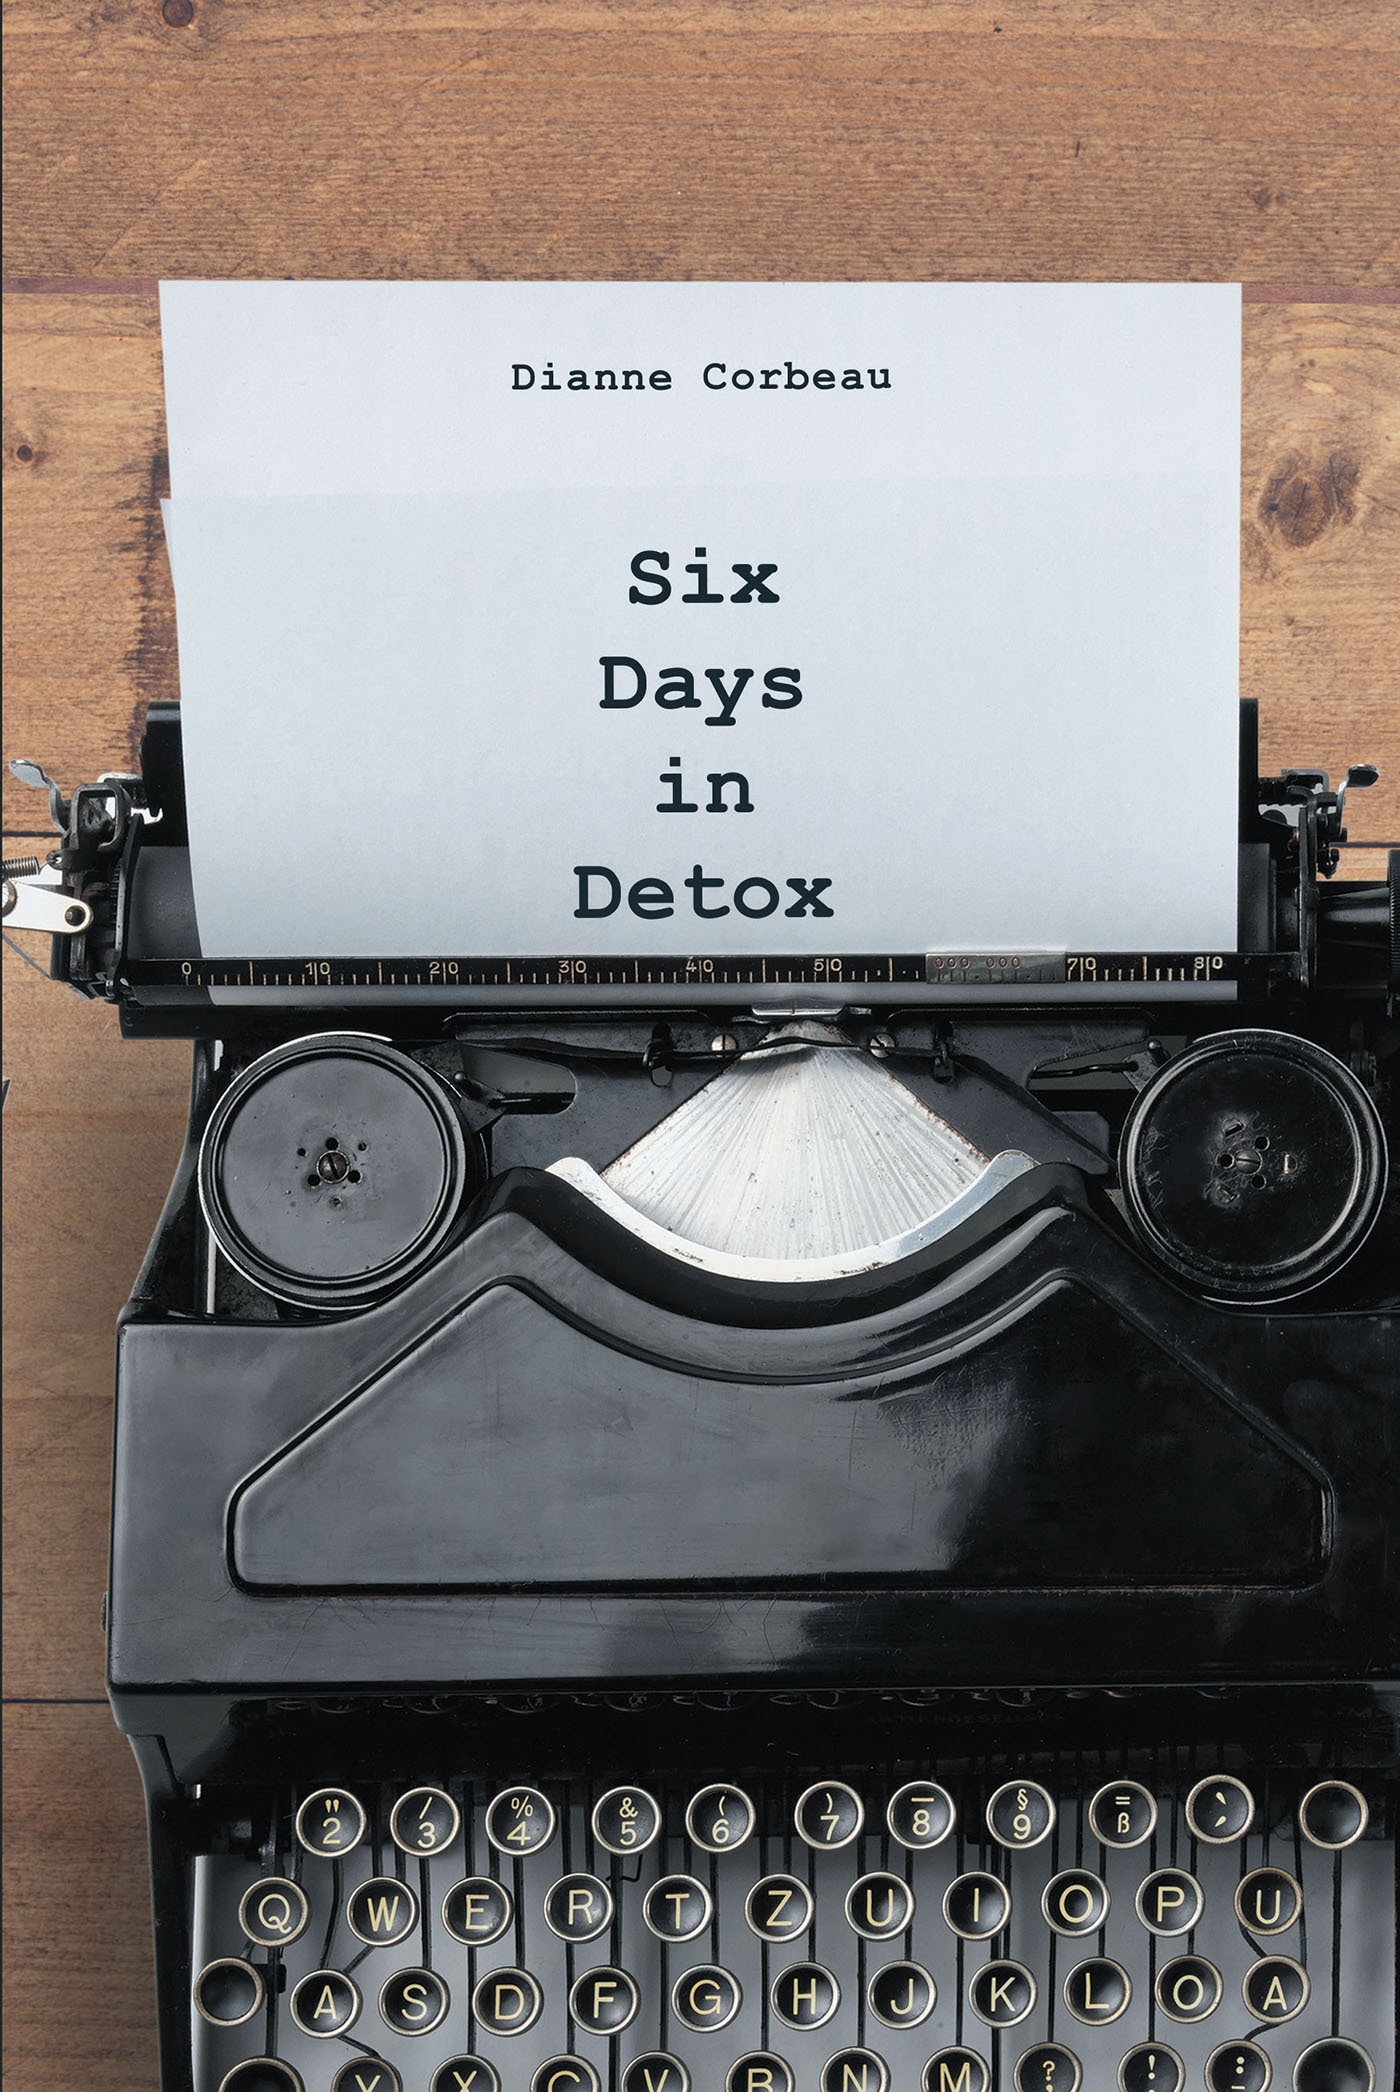 Dianne Corbeau’s New Book, "Six Days in Detox," is a Compelling Memoir About a Woman Who Picks Up Alcohol After Twenty-Six Years of Sobriety